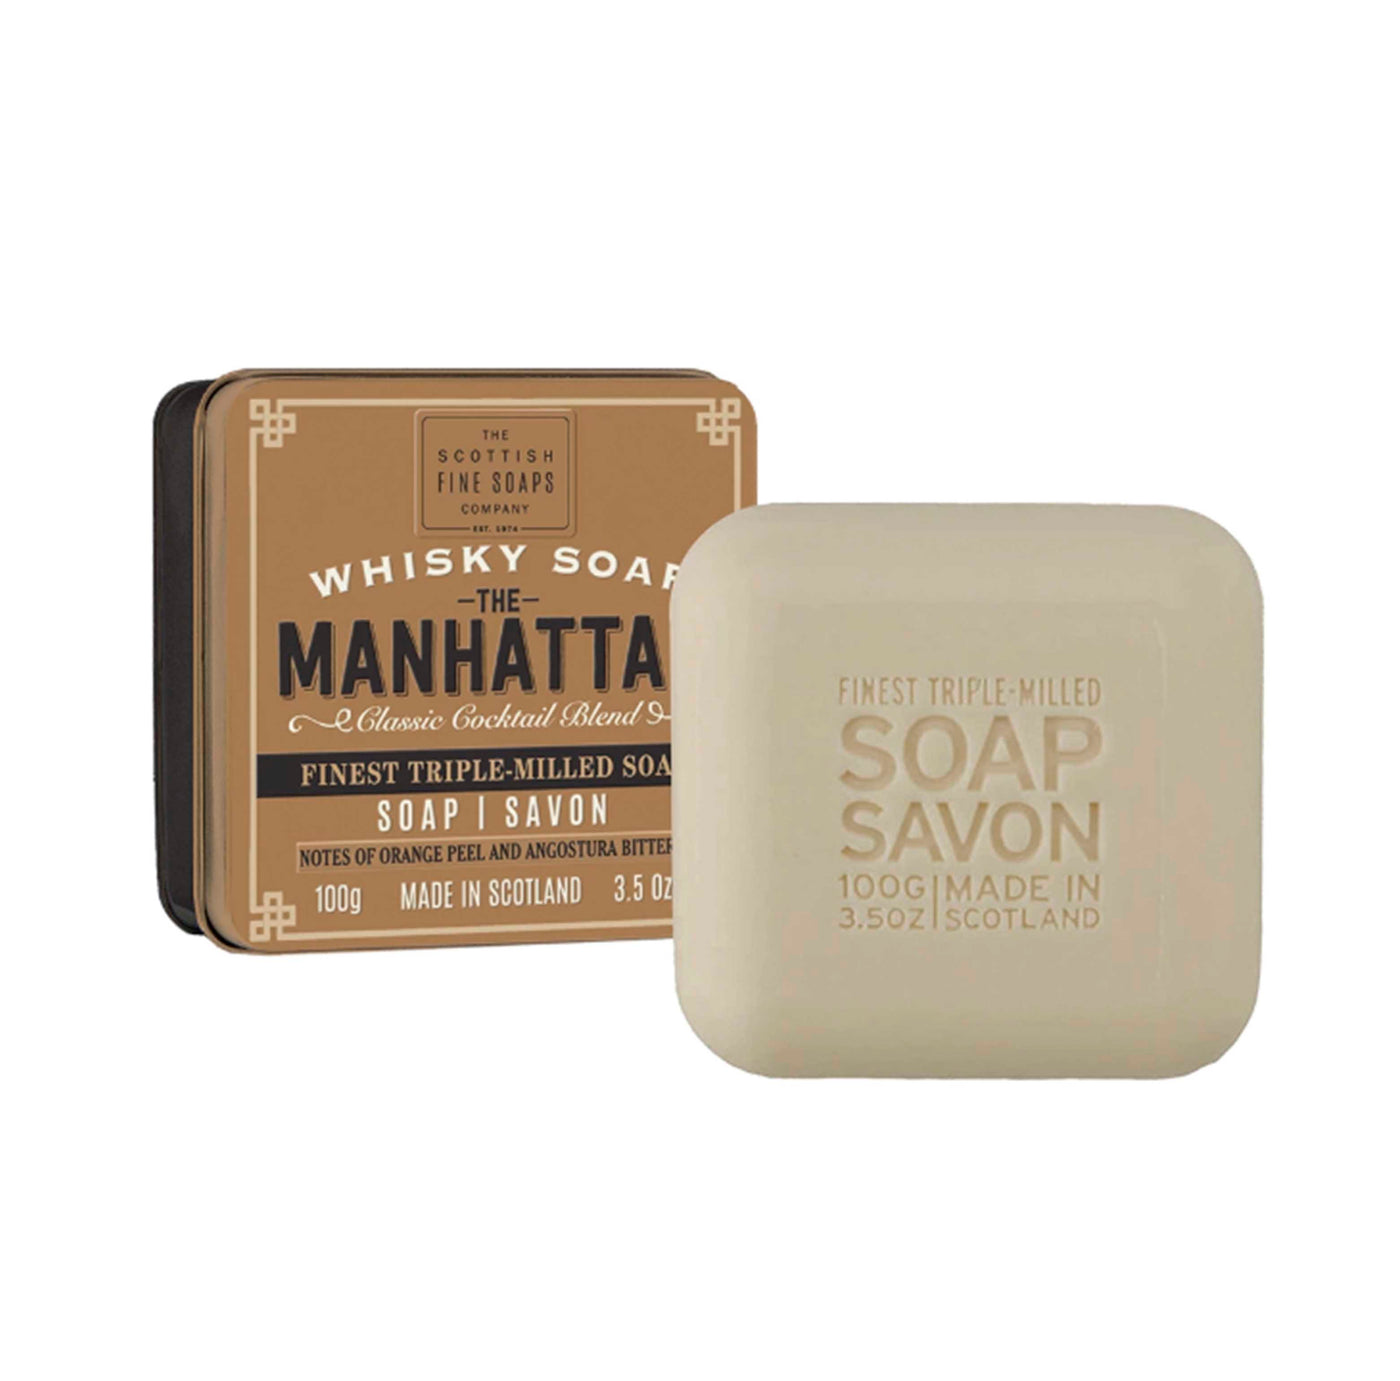 Cocktail inspired soaps and gift sets